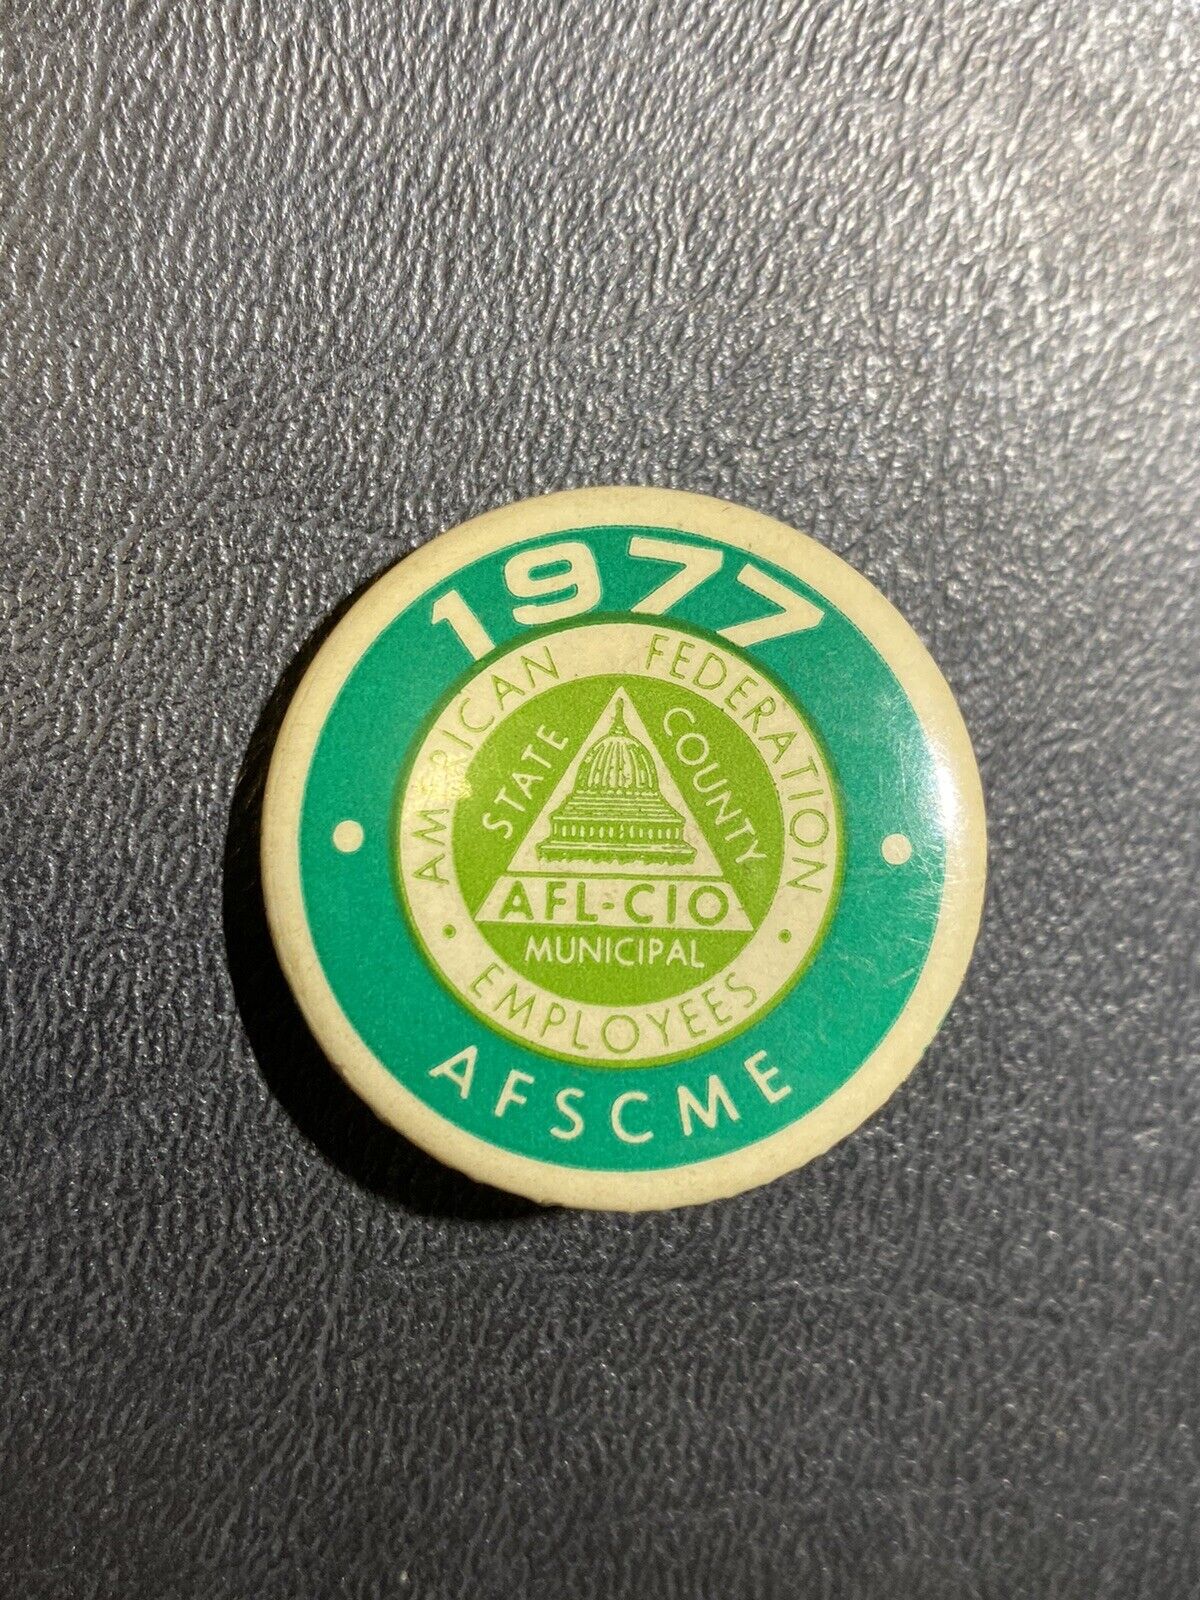 VTG 1977 AFSCME AMERICAN FEDERATION EMPLOYEES PIN BACK BUTTON PIN AFL-CIO UNION